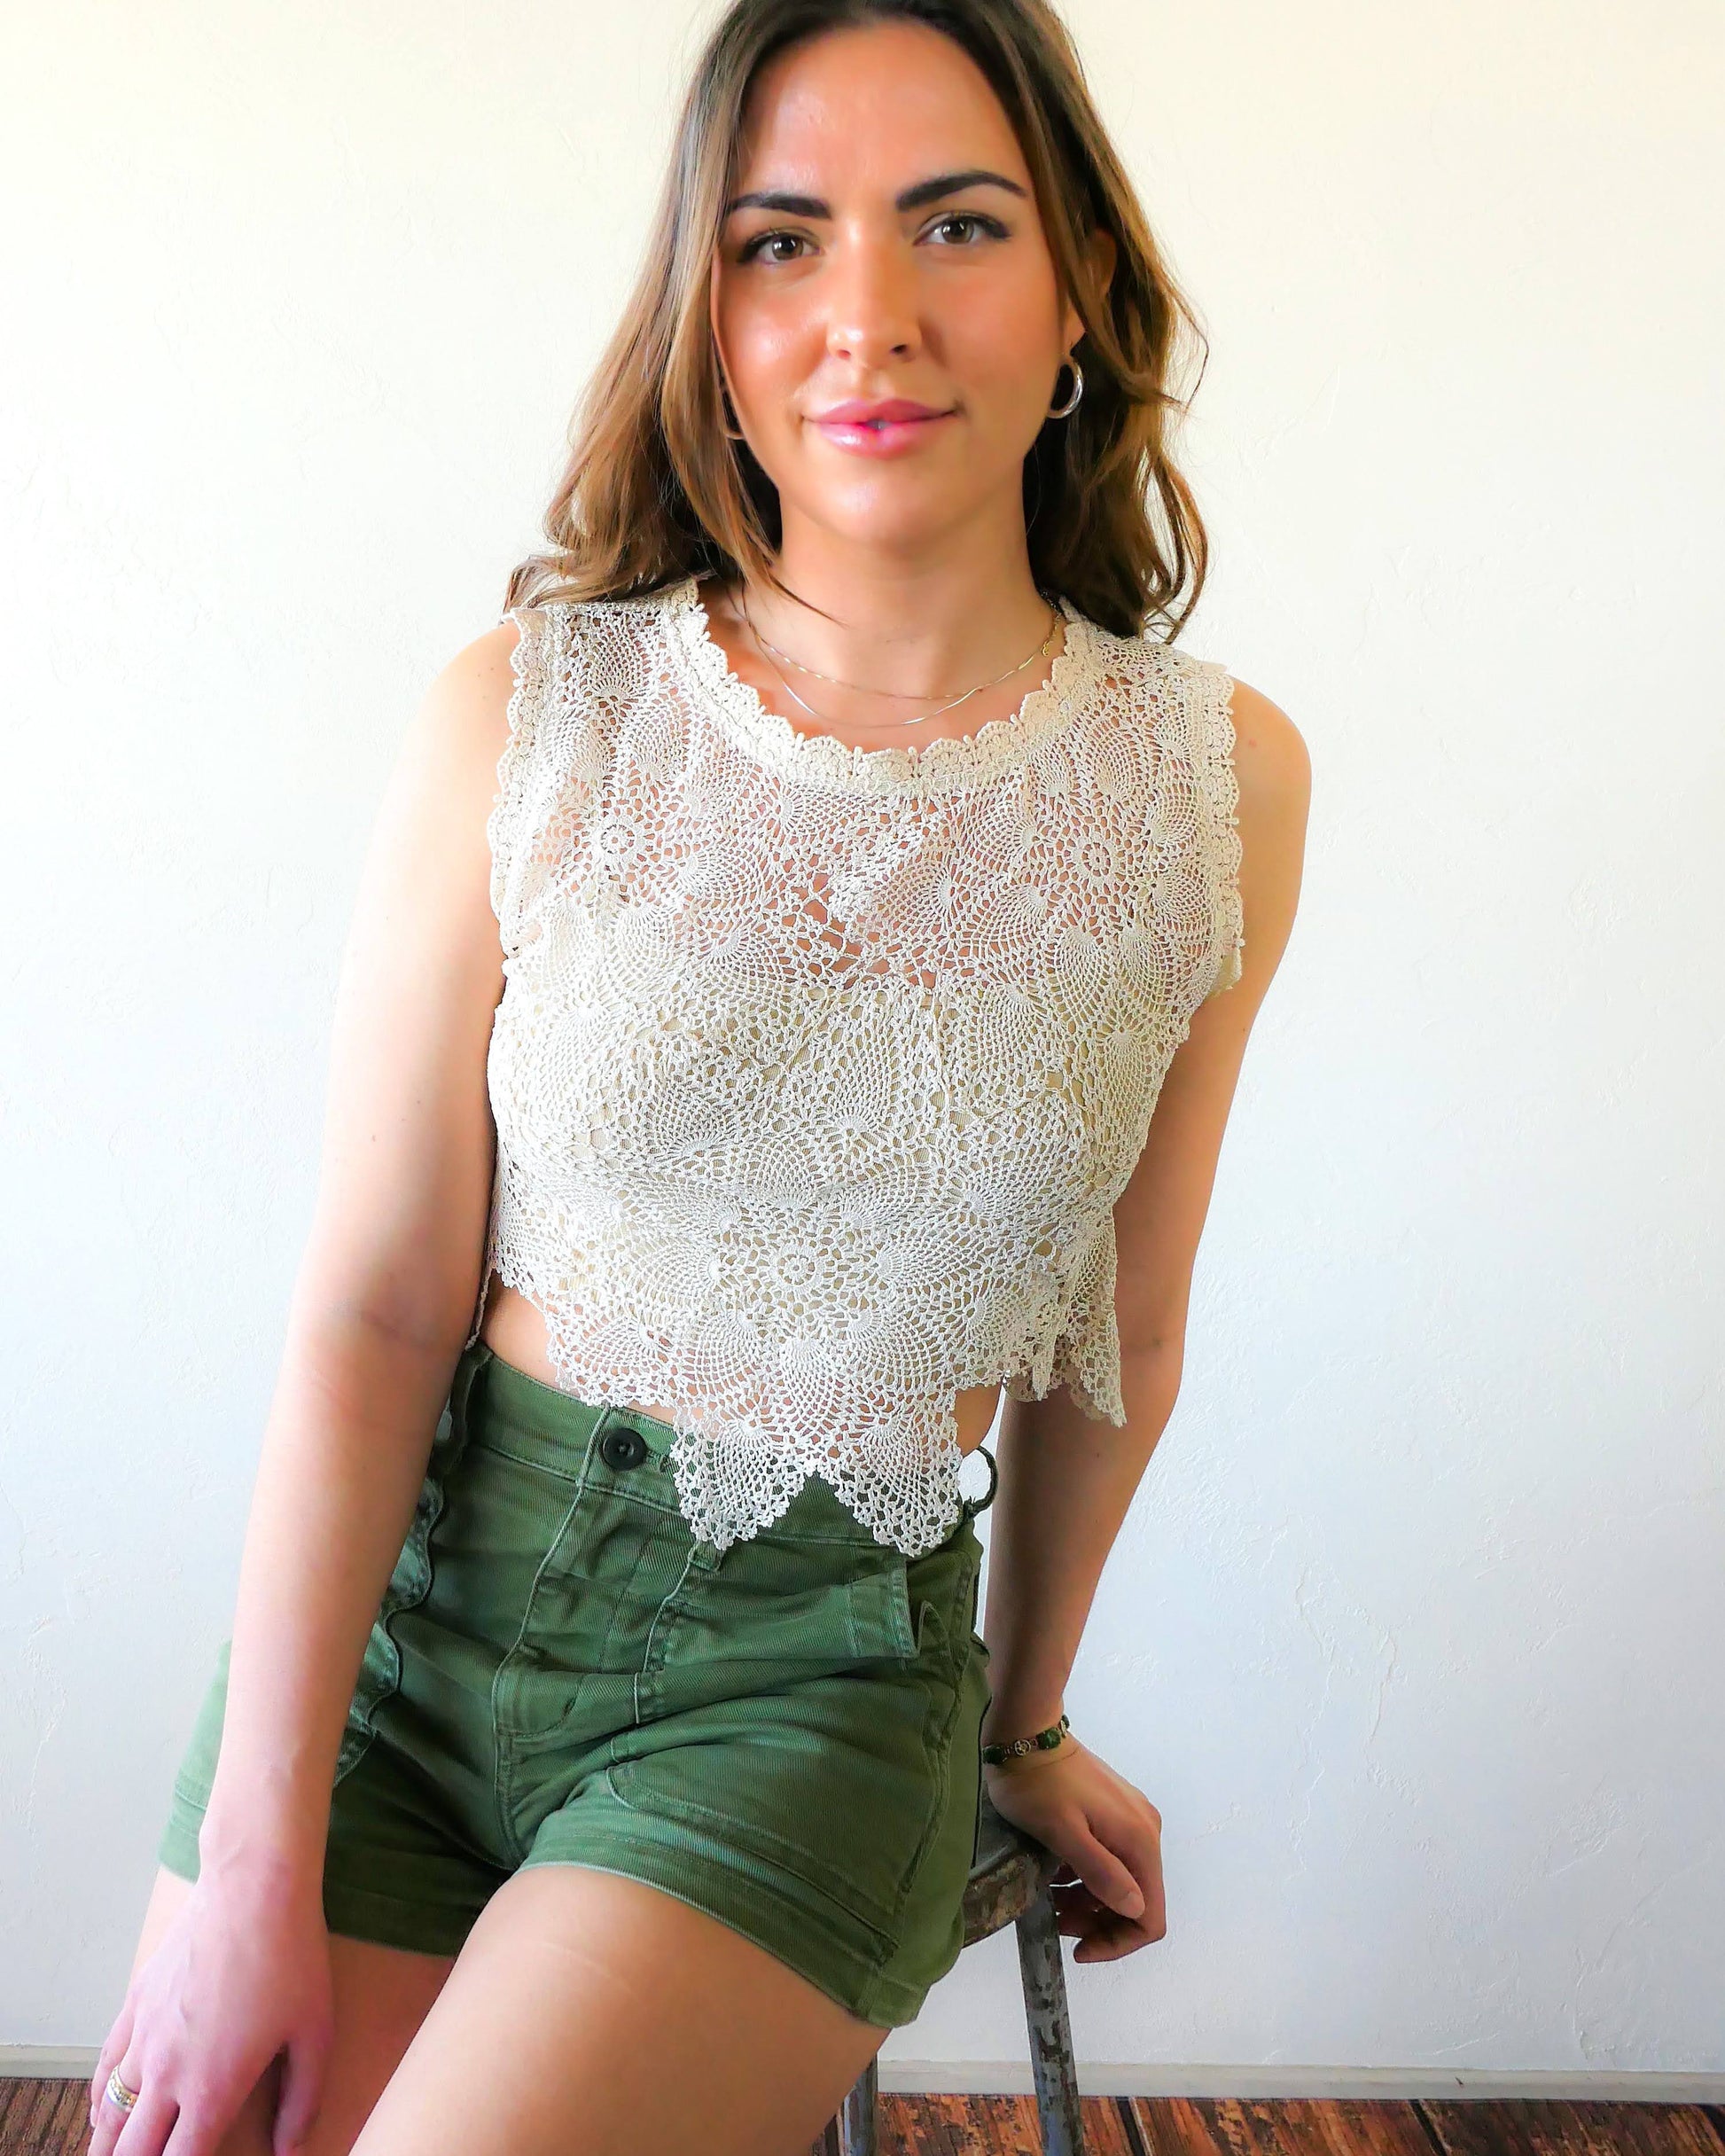 An ultra casual, hip, and boho-chic crop tank top made with interconnected flower doilies reminiscent of the white lotus, which symbolizes peace, tranquility, and calmness.  Lace trim at the collar and sleeve.  Model is wearing natural colored crochet top by Lim's Vintage. 